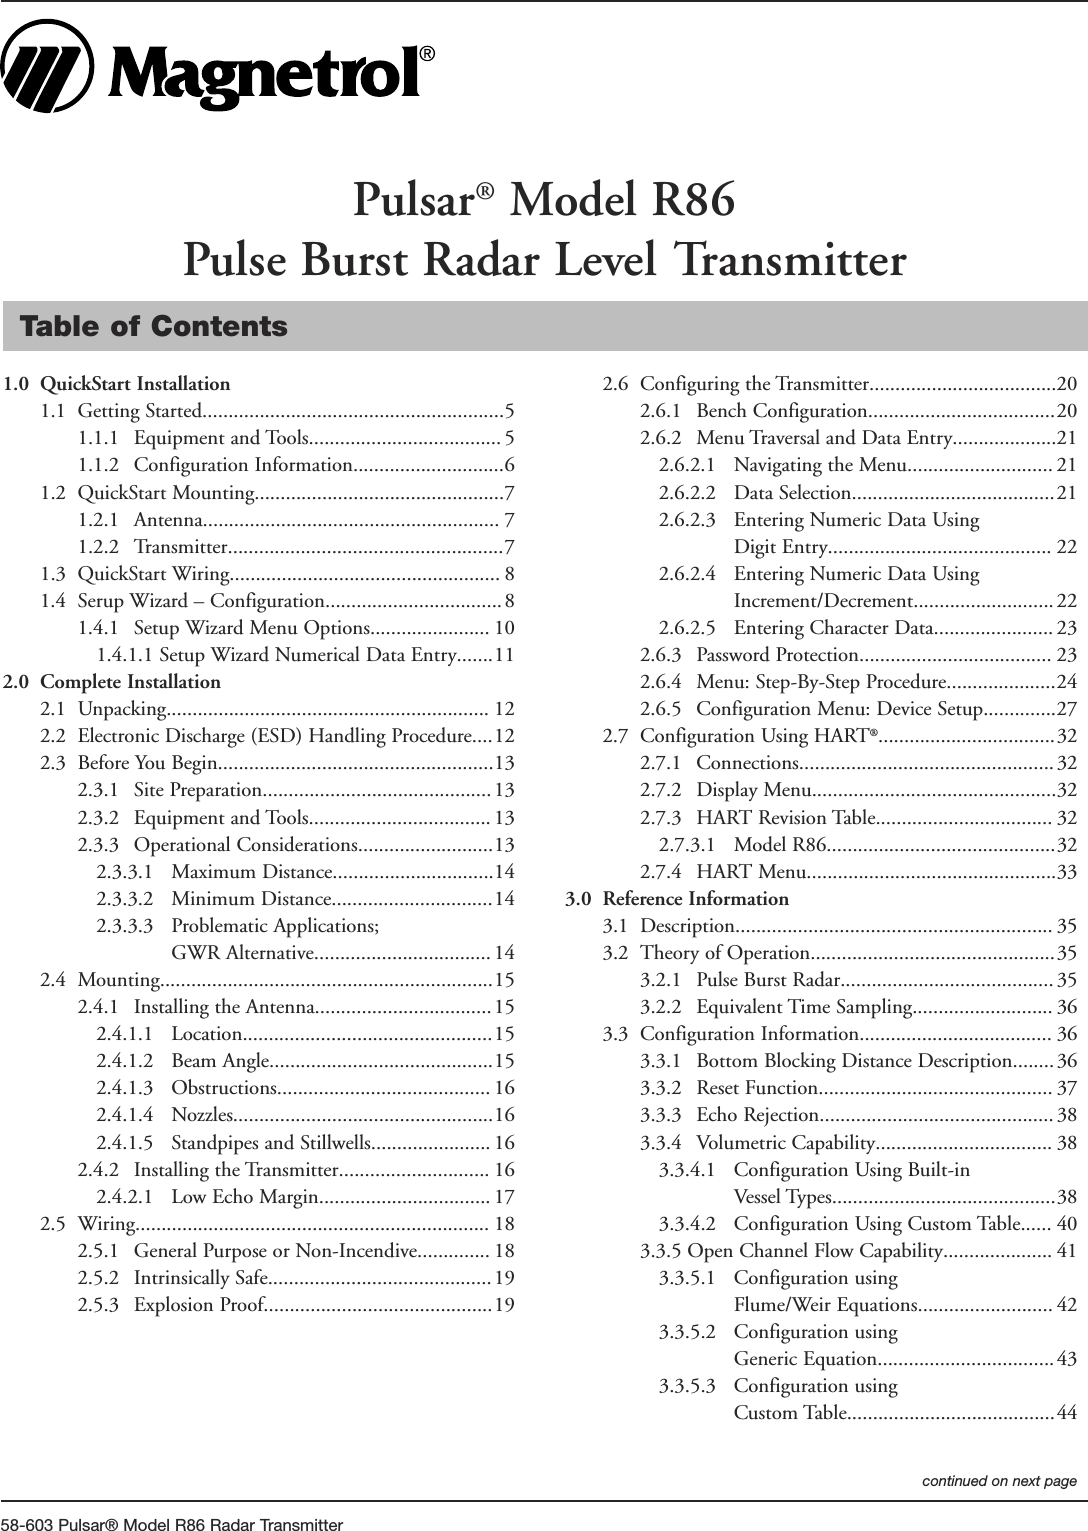 58-603 Pulsar® Model R86 Radar TransmitterTable of Contents1.0 QuickStart Installation1.1 Getting Started..........................................................51.1.1 Equipment and Tools..................................... 51.1.2 Configuration Information.............................61.2 QuickStart Mounting................................................71.2.1 Antenna......................................................... 71.2.2 Transmitter.....................................................71.3 QuickStart Wiring.................................................... 81.4 Serup Wizard – Configuration..................................81.4.1 Setup Wizard Menu Options....................... 101.4.1.1 Setup Wizard Numerical Data Entry.......112.0 Complete Installation2.1 Unpacking.............................................................. 122.2 Electronic Discharge (ESD) Handling Procedure....122.3 Before You Begin.....................................................132.3.1 Site Preparation............................................ 132.3.2 Equipment and Tools................................... 132.3.3 Operational Considerations..........................132.3.3.1 Maximum Distance...............................142.3.3.2 Minimum Distance...............................142.3.3.3 Problematic Applications;GWR Alternative.................................. 142.4 Mounting................................................................152.4.1 Installing the Antenna.................................. 152.4.1.1 Location................................................152.4.1.2 Beam Angle...........................................152.4.1.3 Obstructions......................................... 162.4.1.4 Nozzles..................................................162.4.1.5 Standpipes and Stillwells....................... 162.4.2 Installing the Transmitter............................. 162.4.2.1 Low Echo Margin................................. 172.5 Wiring.................................................................... 182.5.1 General Purpose or Non-Incendive.............. 182.5.2 Intrinsically Safe...........................................192.5.3 Explosion Proof............................................192.6 Configuring the Transmitter....................................202.6.1 Bench Configuration....................................202.6.2 Menu Traversal and Data Entry....................212.6.2.1  Navigating the Menu............................ 212.6.2.2  Data Selection.......................................212.6.2.3  Entering Numeric Data UsingDigit Entry........................................... 222.6.2.4 Entering Numeric Data UsingIncrement/Decrement........................... 222.6.2.5 Entering Character Data....................... 232.6.3 Password Protection..................................... 232.6.4 Menu: Step-By-Step Procedure.....................242.6.5 Configuration Menu: Device Setup..............272.7 Configuration Using HART®..................................322.7.1 Connections................................................. 322.7.2 Display Menu...............................................322.7.3 HART Revision Table.................................. 322.7.3.1 Model R86............................................322.7.4 HART Menu................................................333.0 Reference Information3.1 Description............................................................. 353.2 Theory of Operation...............................................353.2.1 Pulse Burst Radar......................................... 353.2.2 Equivalent Time Sampling........................... 363.3 Configuration Information..................................... 363.3.1 Bottom Blocking Distance Description........ 363.3.2 Reset Function............................................. 373.3.3 Echo Rejection............................................. 383.3.4 Volumetric Capability.................................. 383.3.4.1 Configuration Using Built-inVessel Types...........................................383.3.4.2 Configuration Using Custom Table...... 403.3.5 Open Channel Flow Capability..................... 413.3.5.1 Configuration usingFlume/Weir Equations.......................... 423.3.5.2 Configuration usingGeneric Equation.................................. 433.3.5.3 Configuration usingCustom Table........................................44Pulsar®Model R86Pulse Burst Radar Level Transmittercontinued on next page